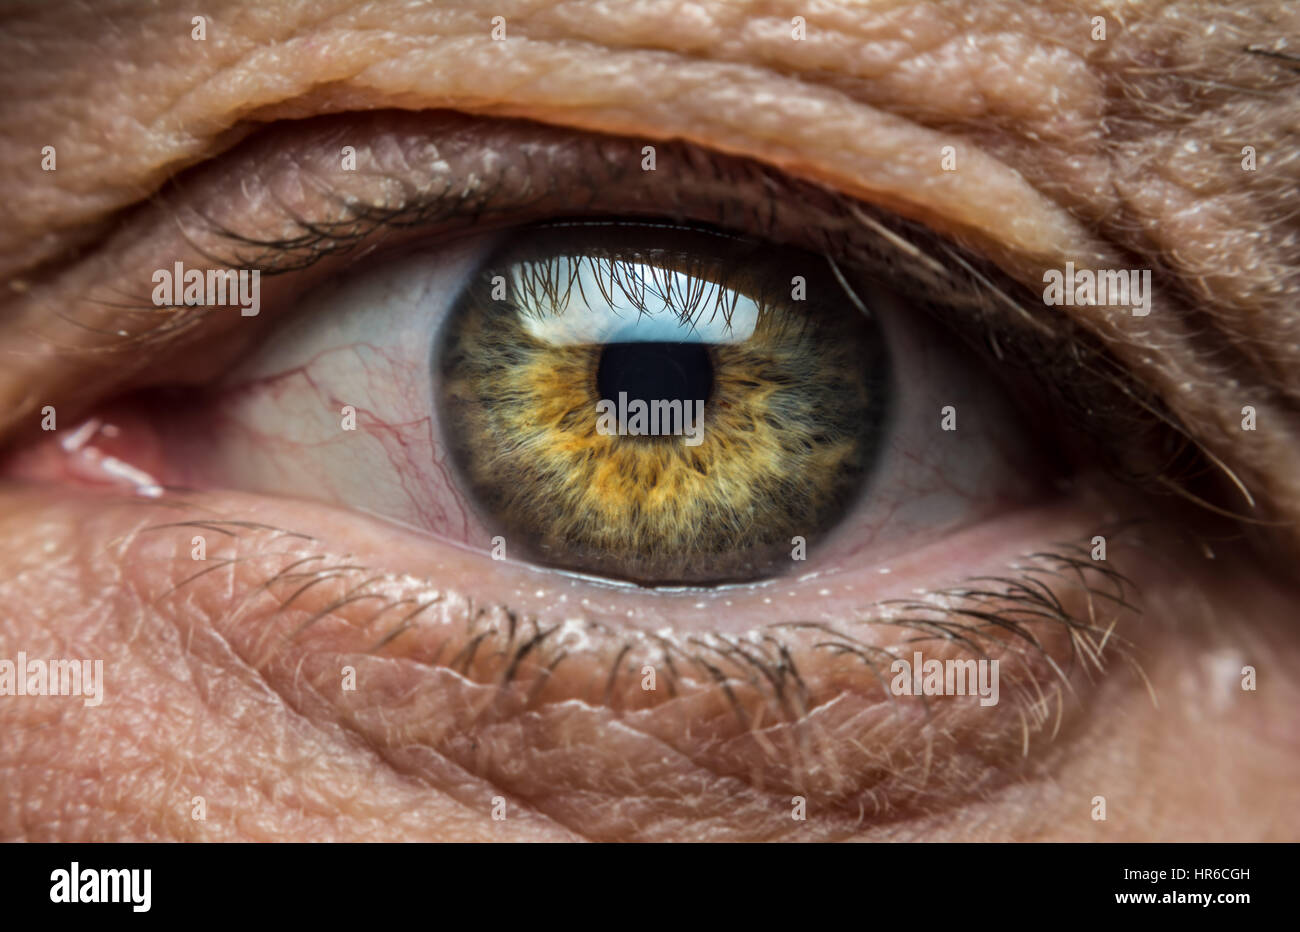 The eye of an old man Stock Photo